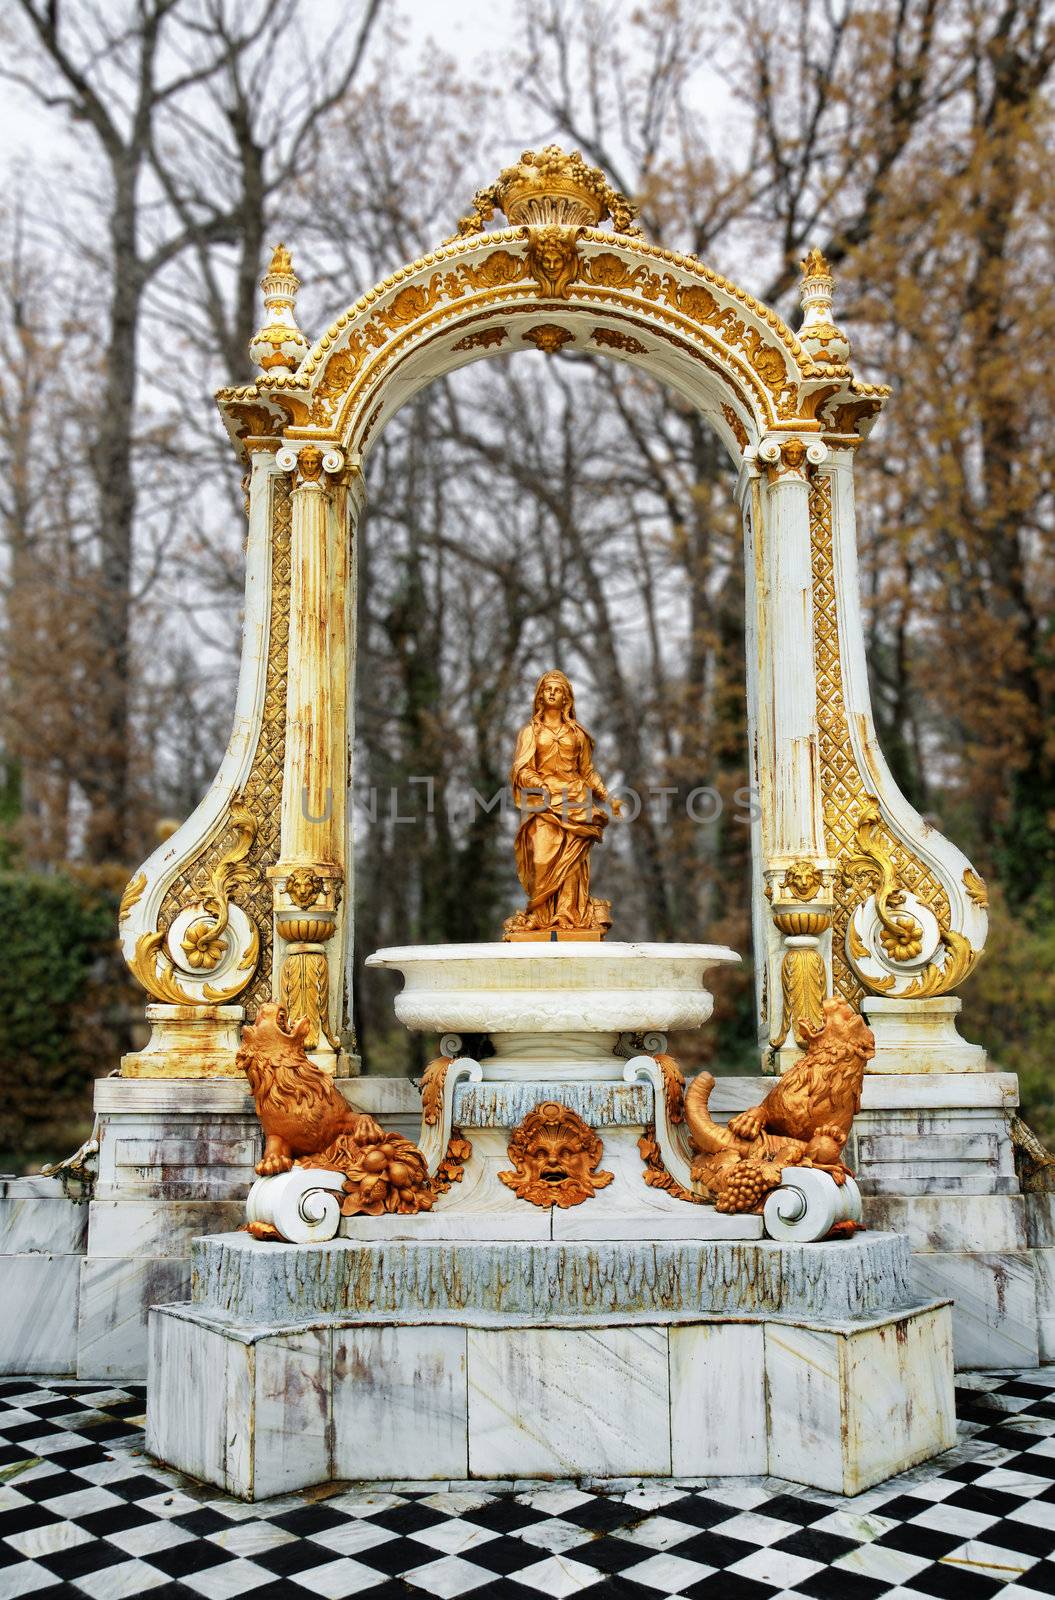 Fountain at palace gardens of La Granja de san Ildefonso , Segovia castile and Le�n Spain. by HERRAEZ